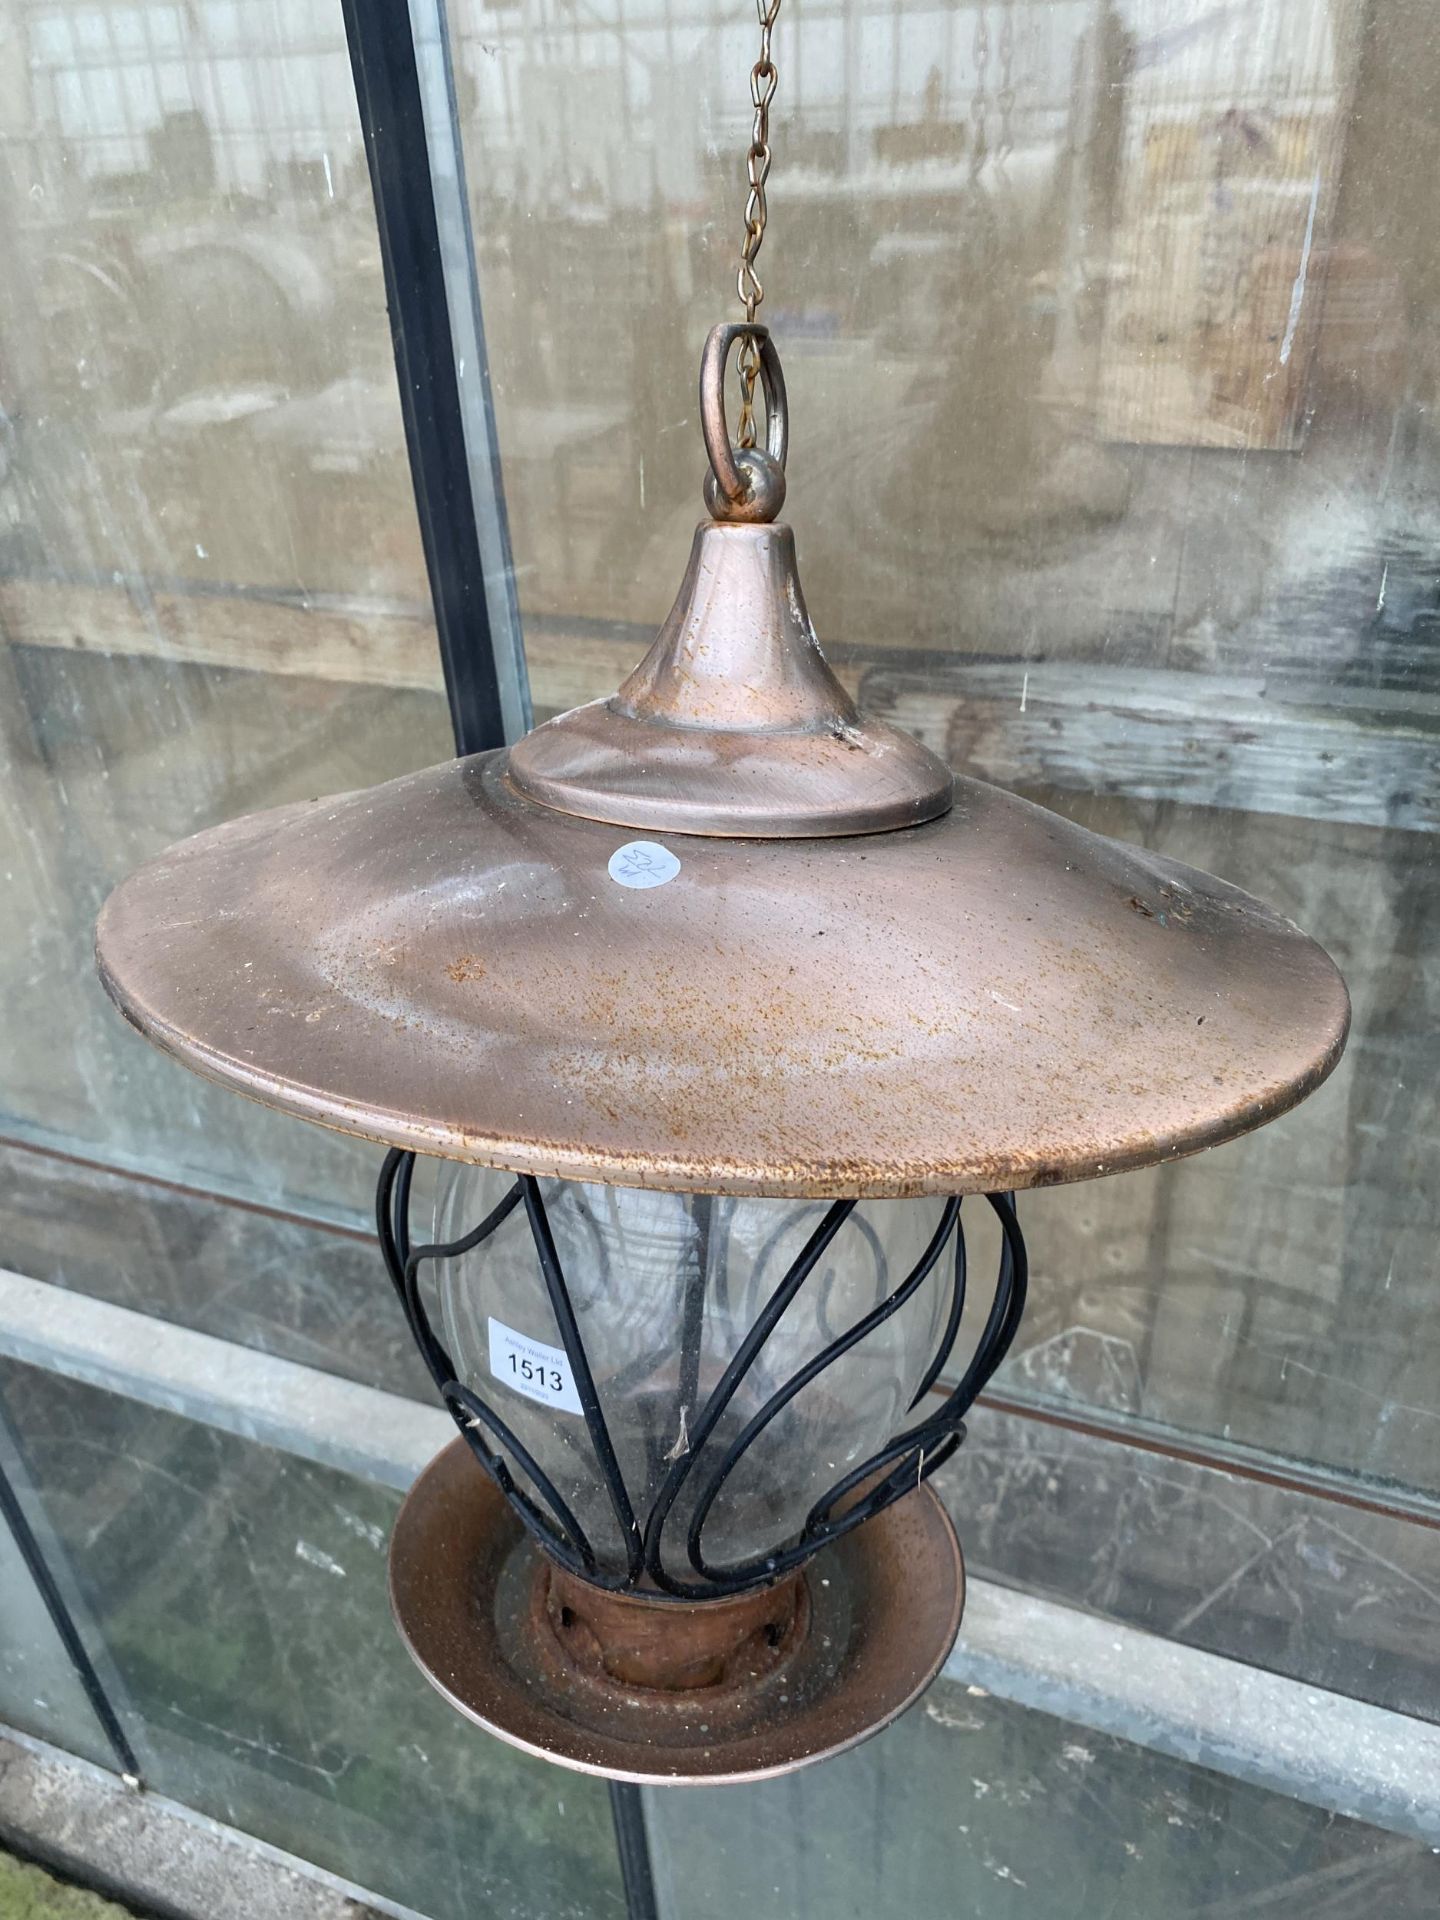 A DECORATIVE COPPER EFFECT LIGHT FITTING - Image 2 of 3